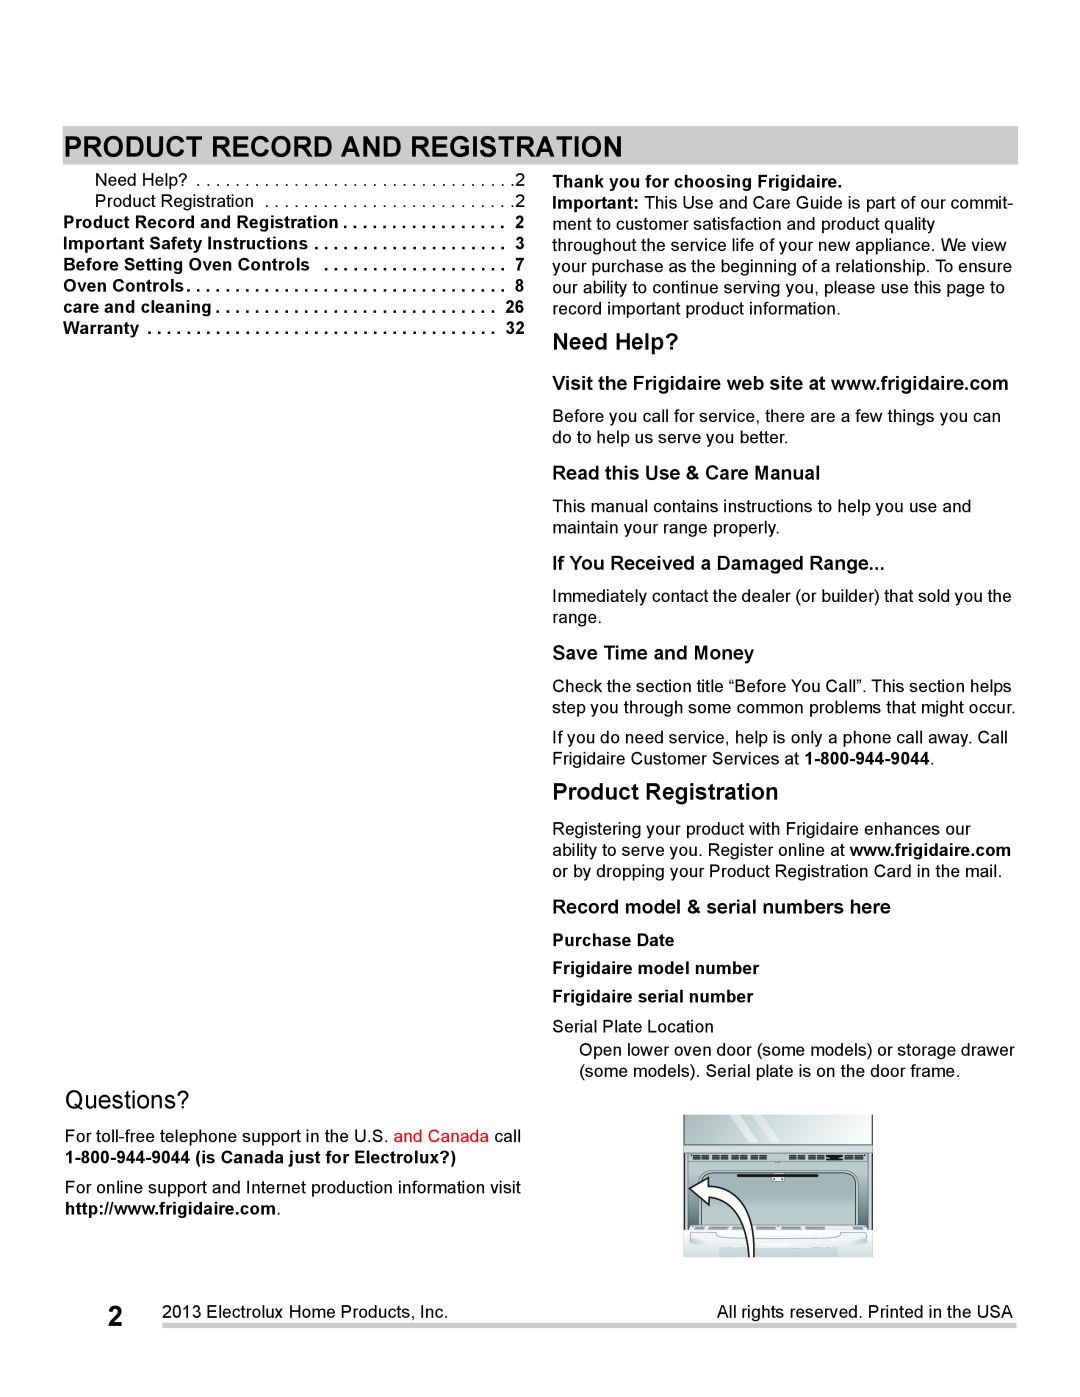 Frigidaire FGET3065PF Product Record And Registration, Read this Use & Care Manual, If You Received a Damaged Range 